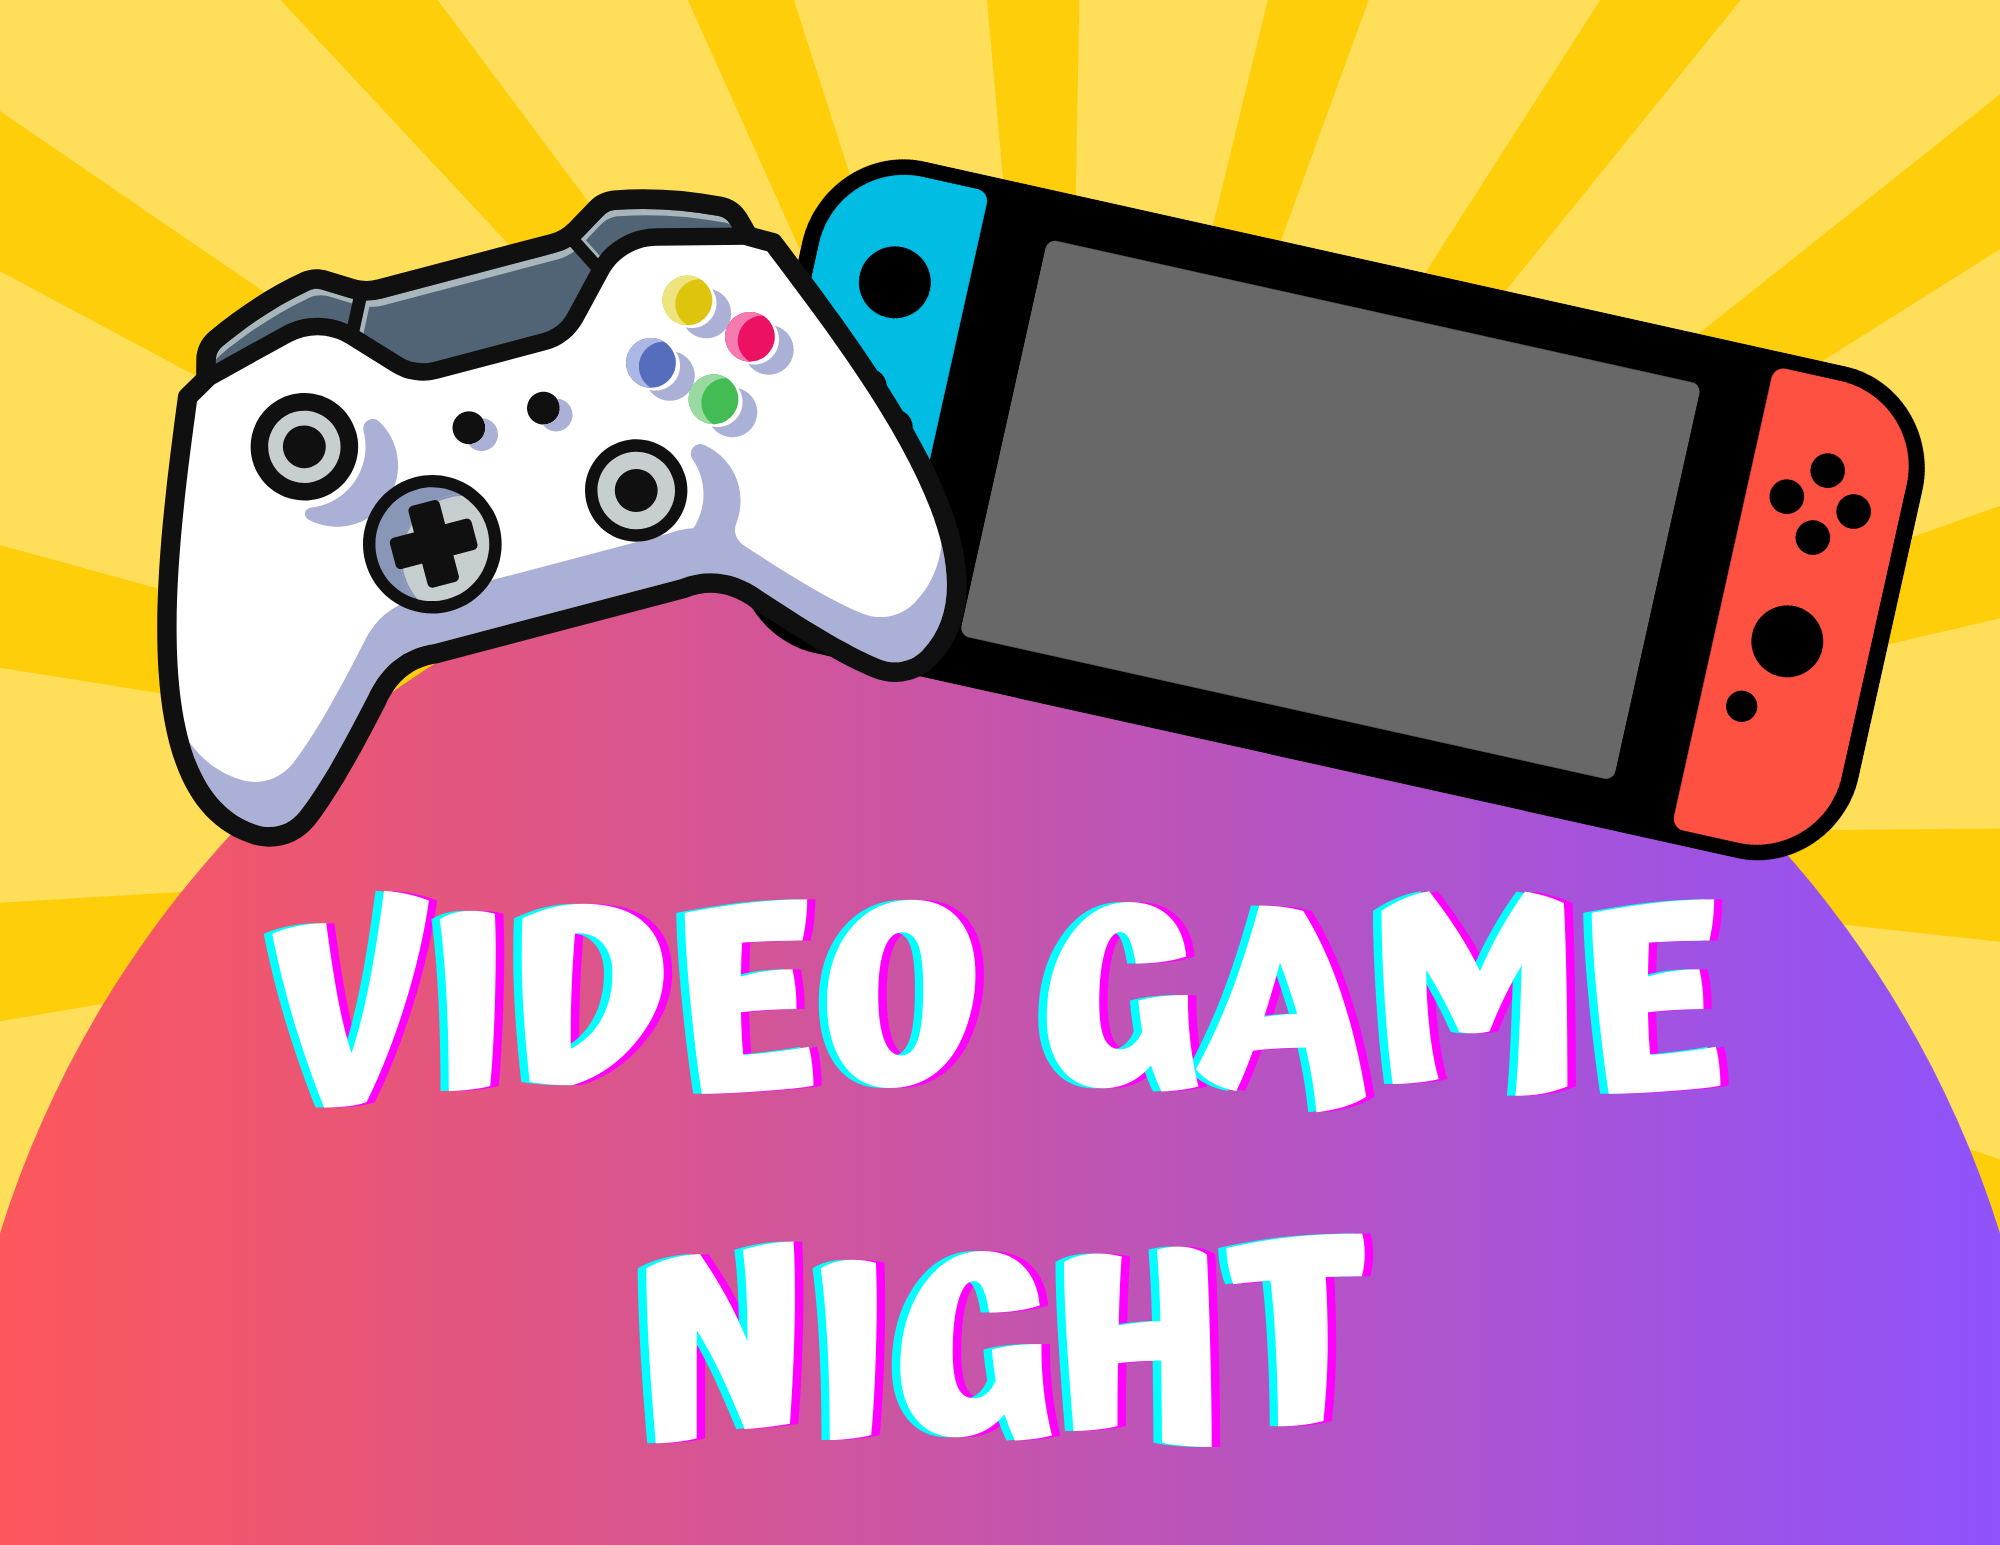 graphic of an xboxone controller and a switch above the text "Video Game Night"